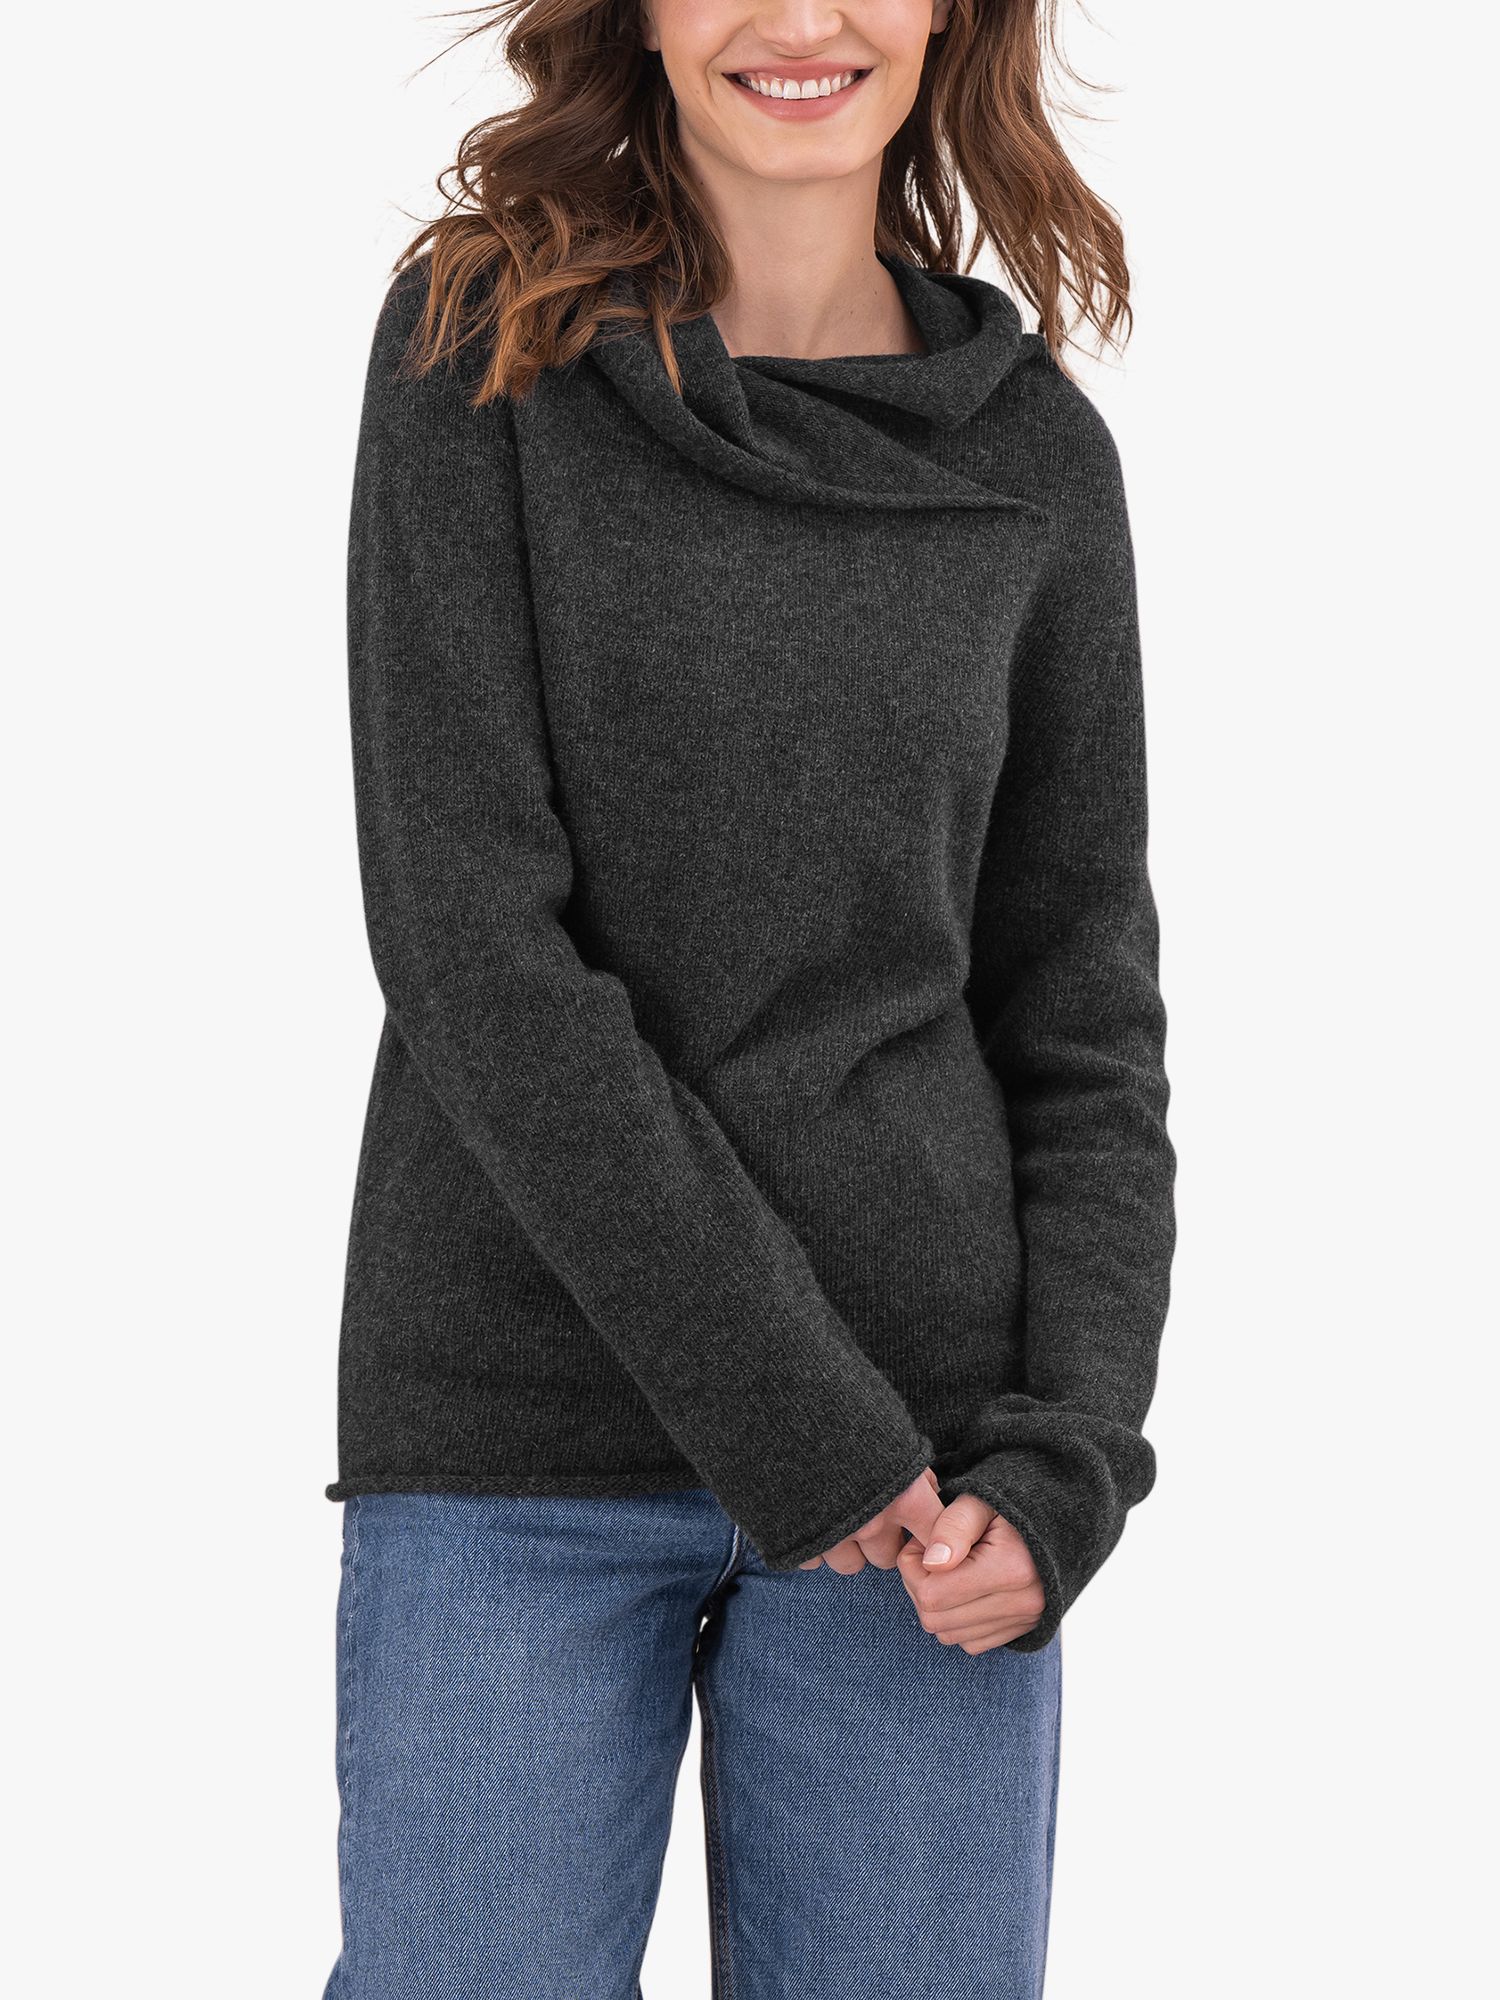 Celtic & Co. Collared Slouch Wool Jumper, Charcoal at John Lewis & Partners